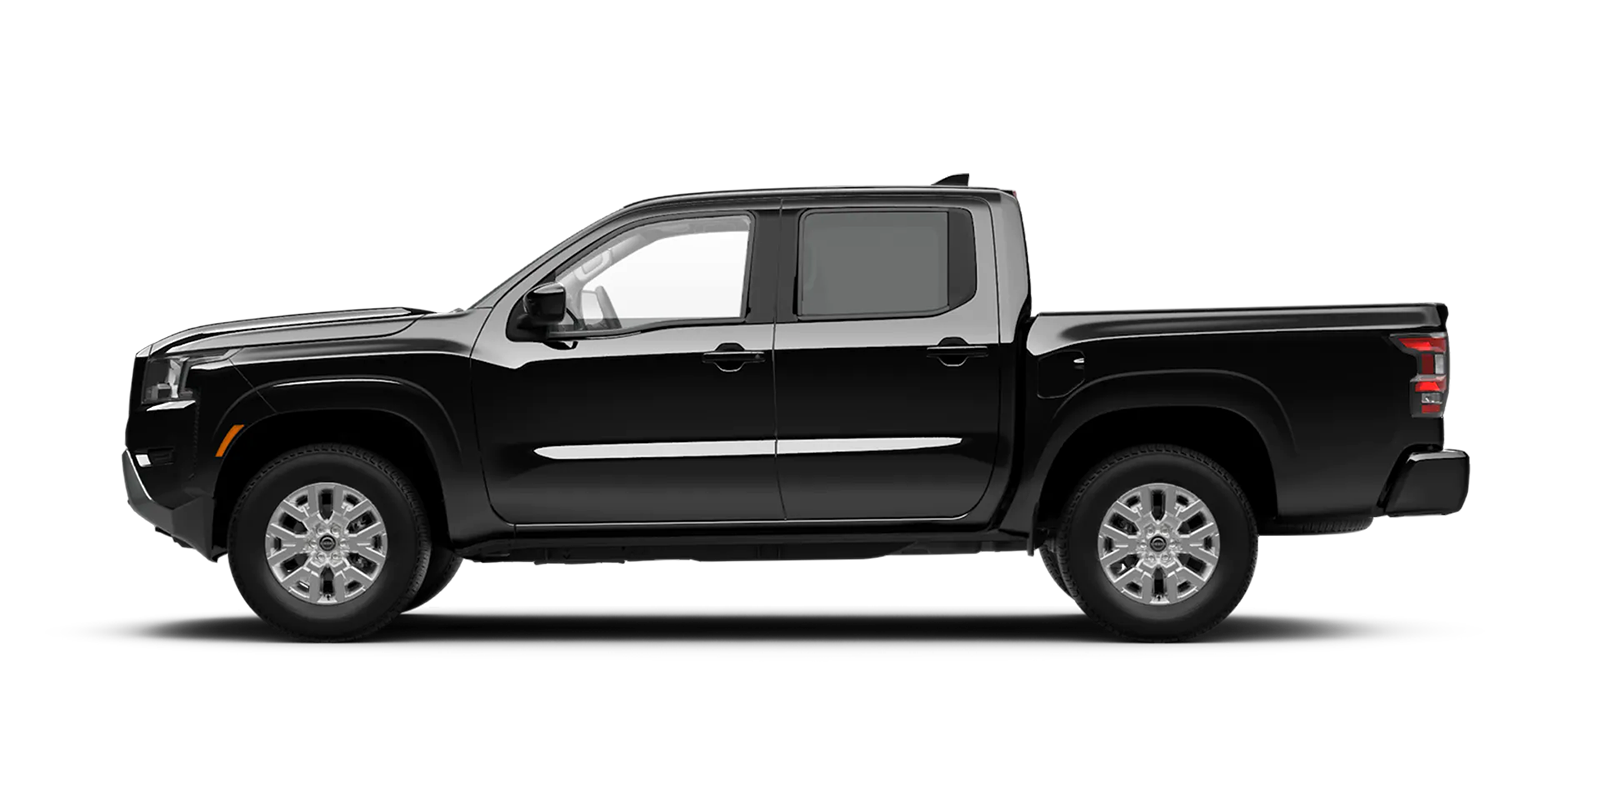 2022 Frontier Crew Cab SV 4x4 in Super Black | Fort Collins Nissan in Fort Collins CO